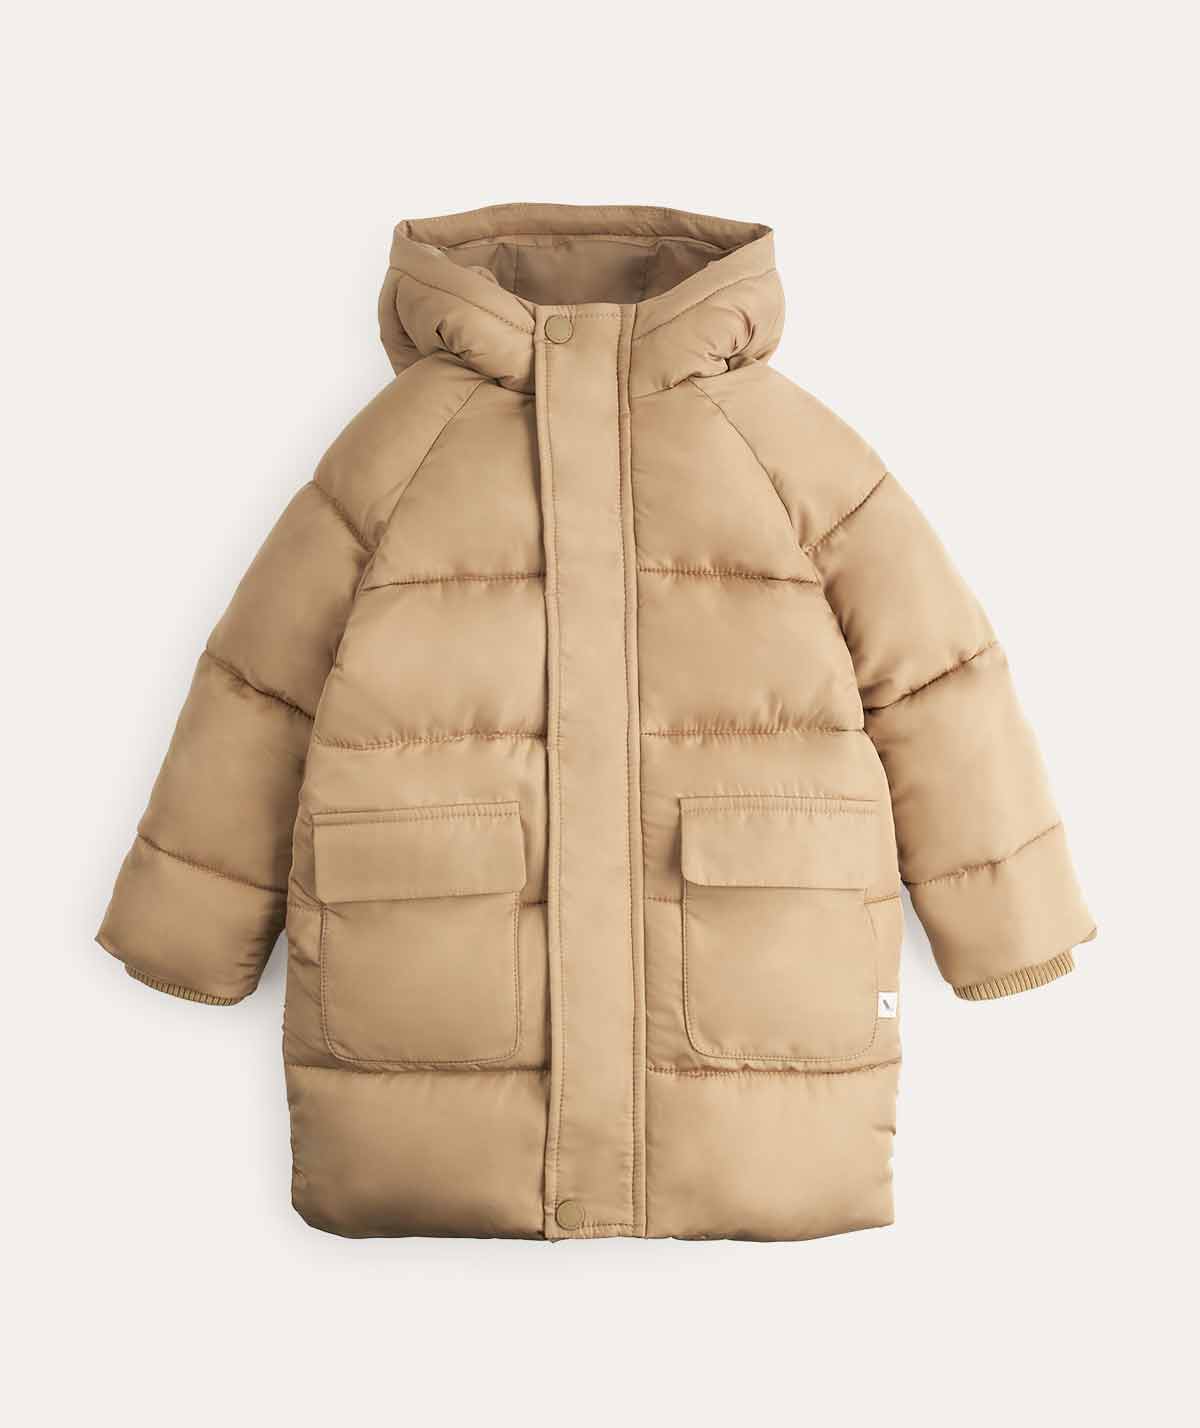 Buy the KIDLY Label Puffer Coat online at KIDLY